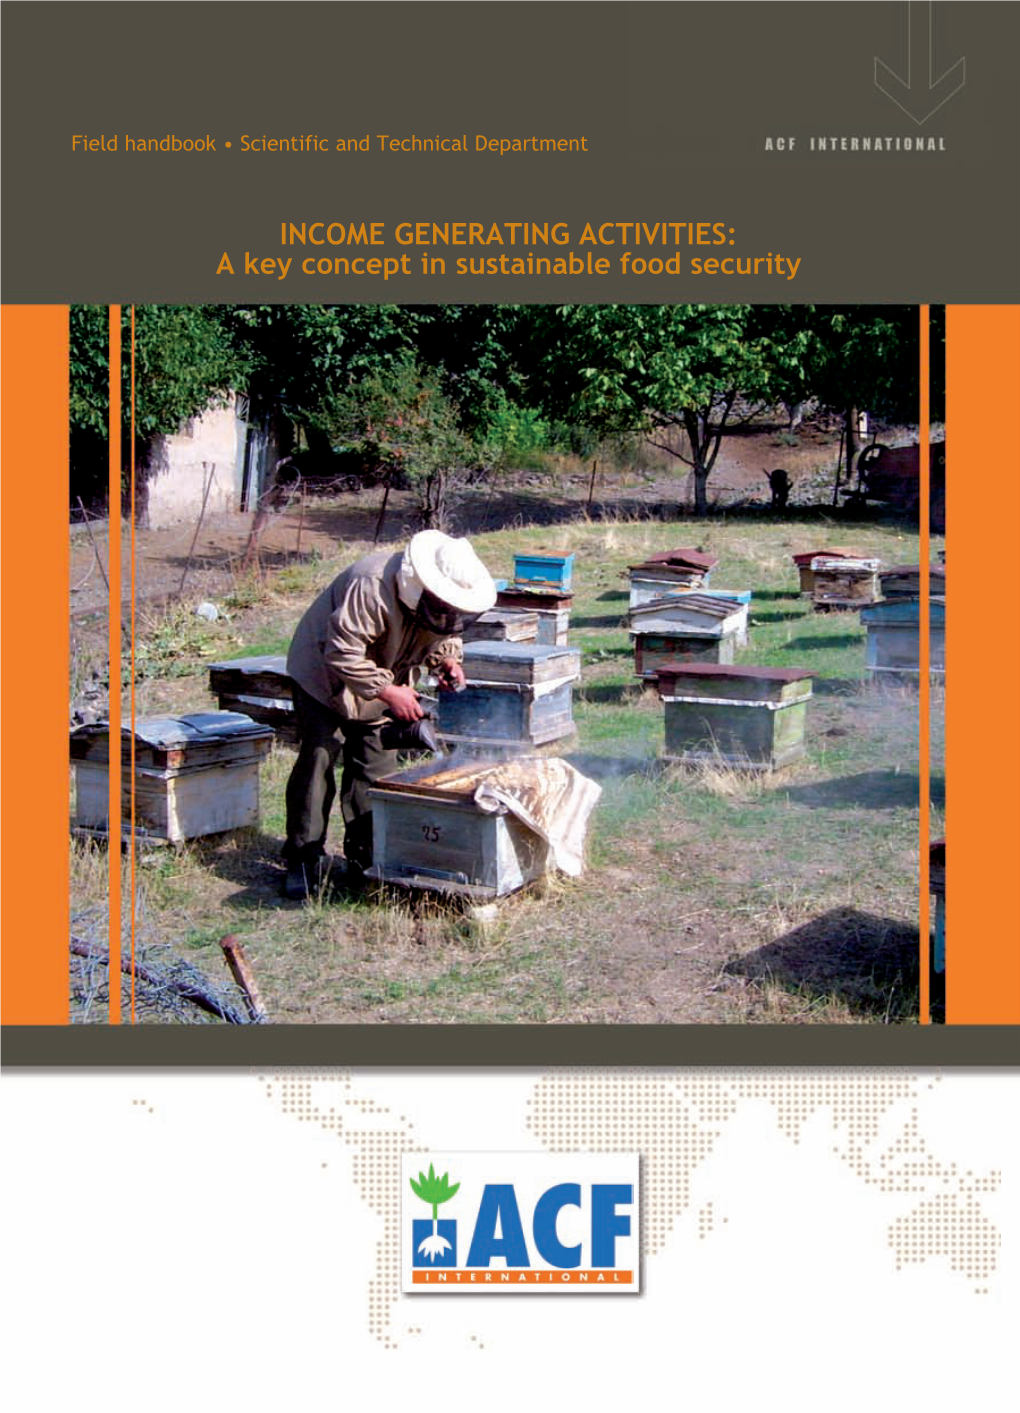 INCOME GENERATING ACTIVITIES: a Key Concept in Sustainable Food Security